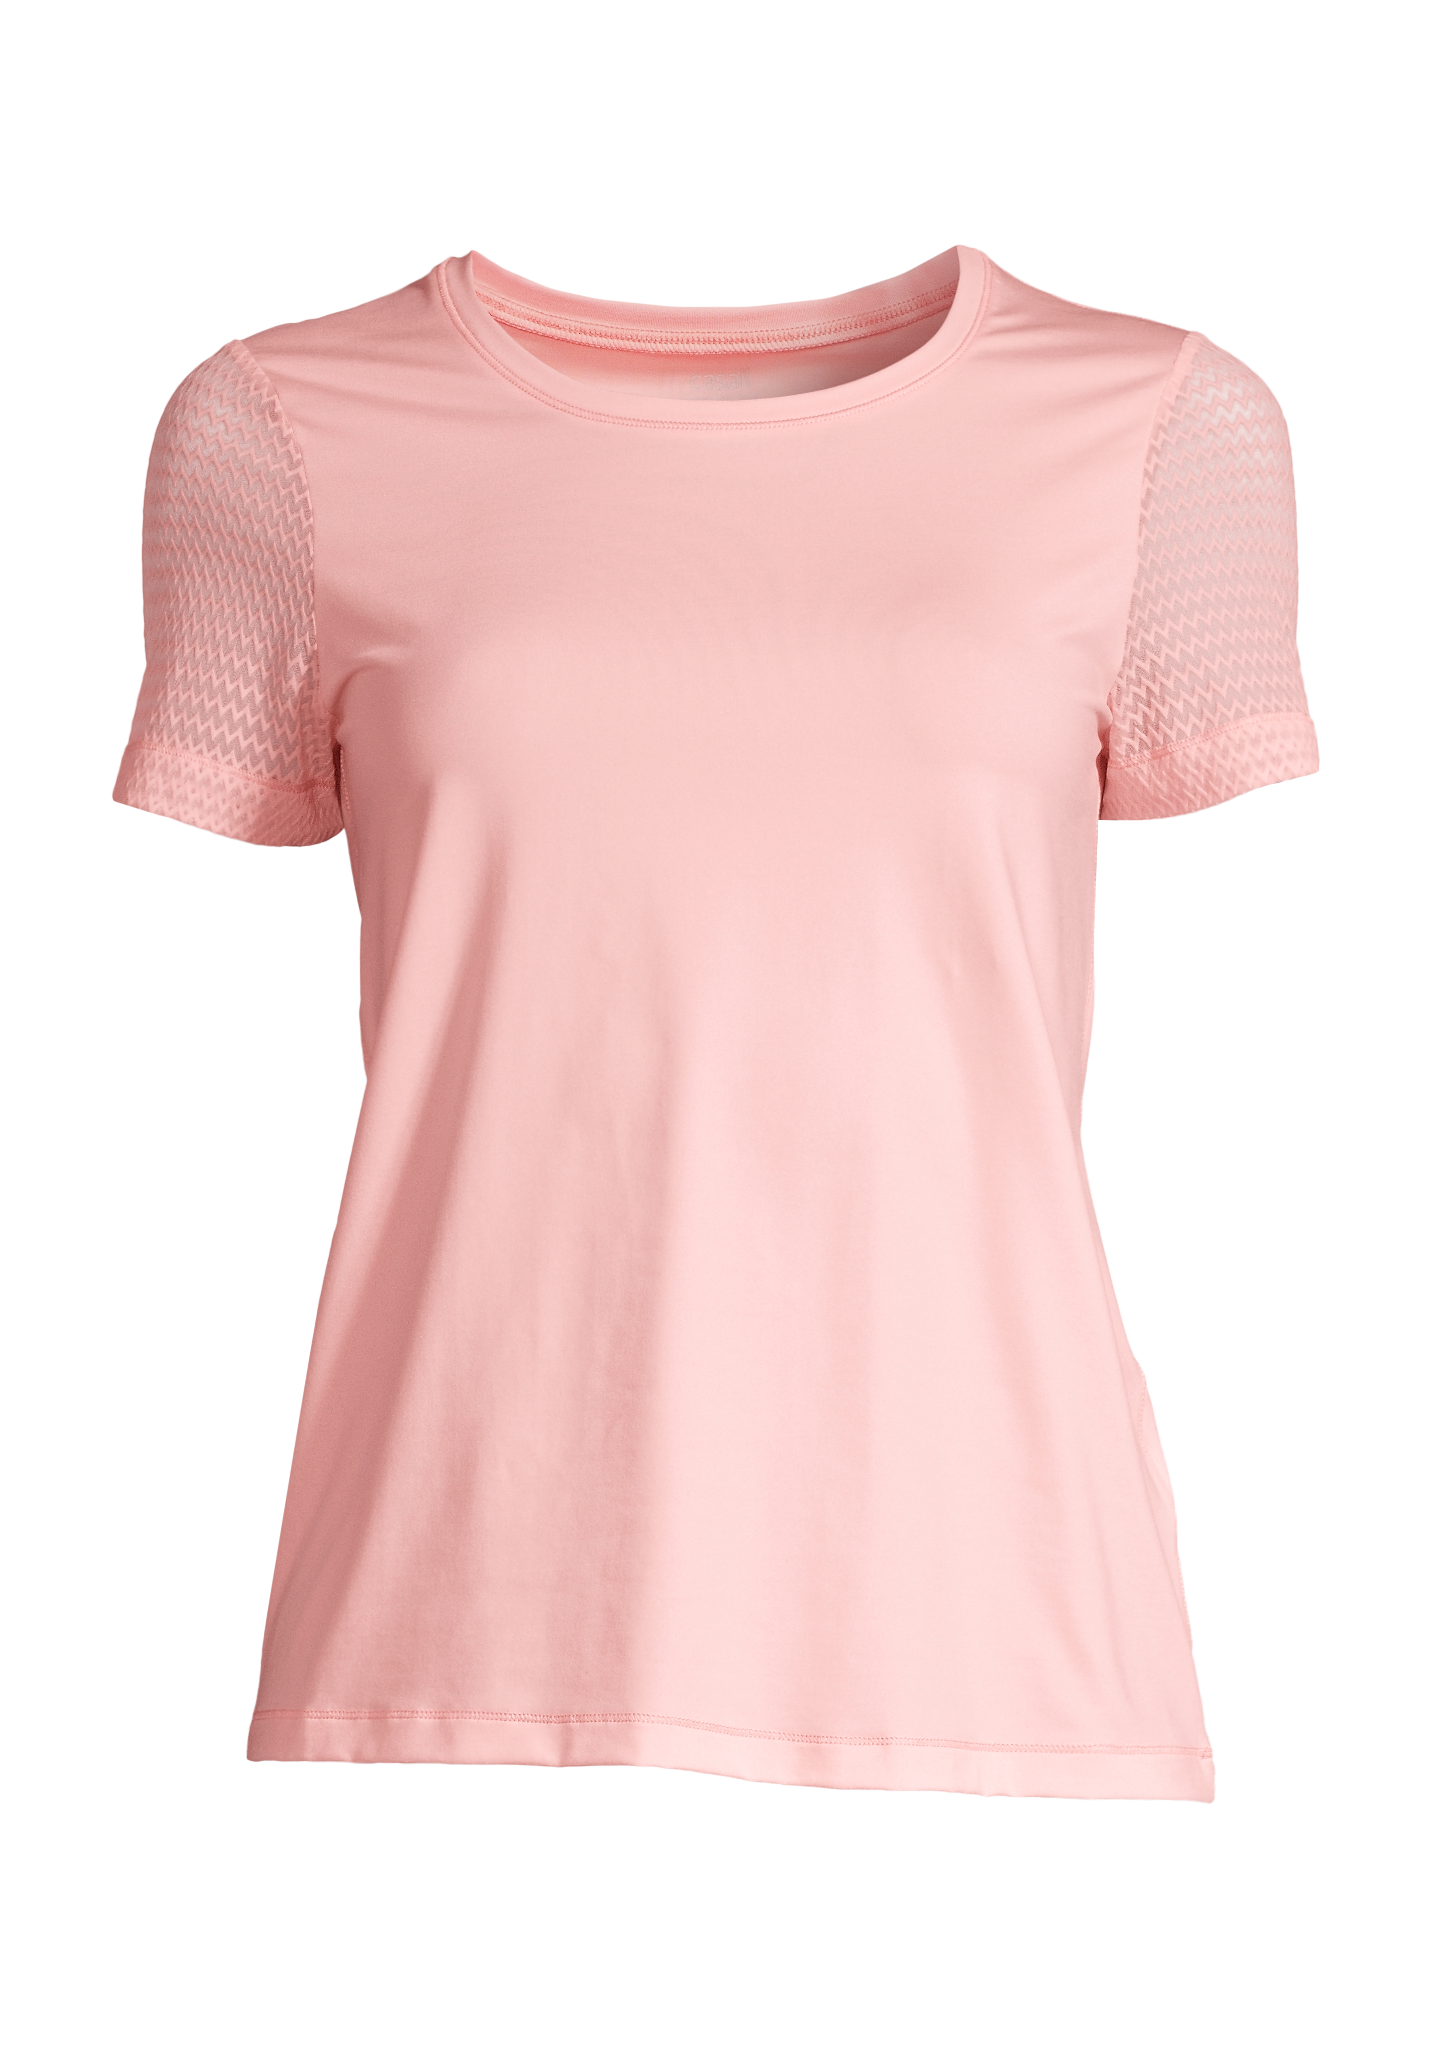 Casall Synergy Tee – Energized Pink